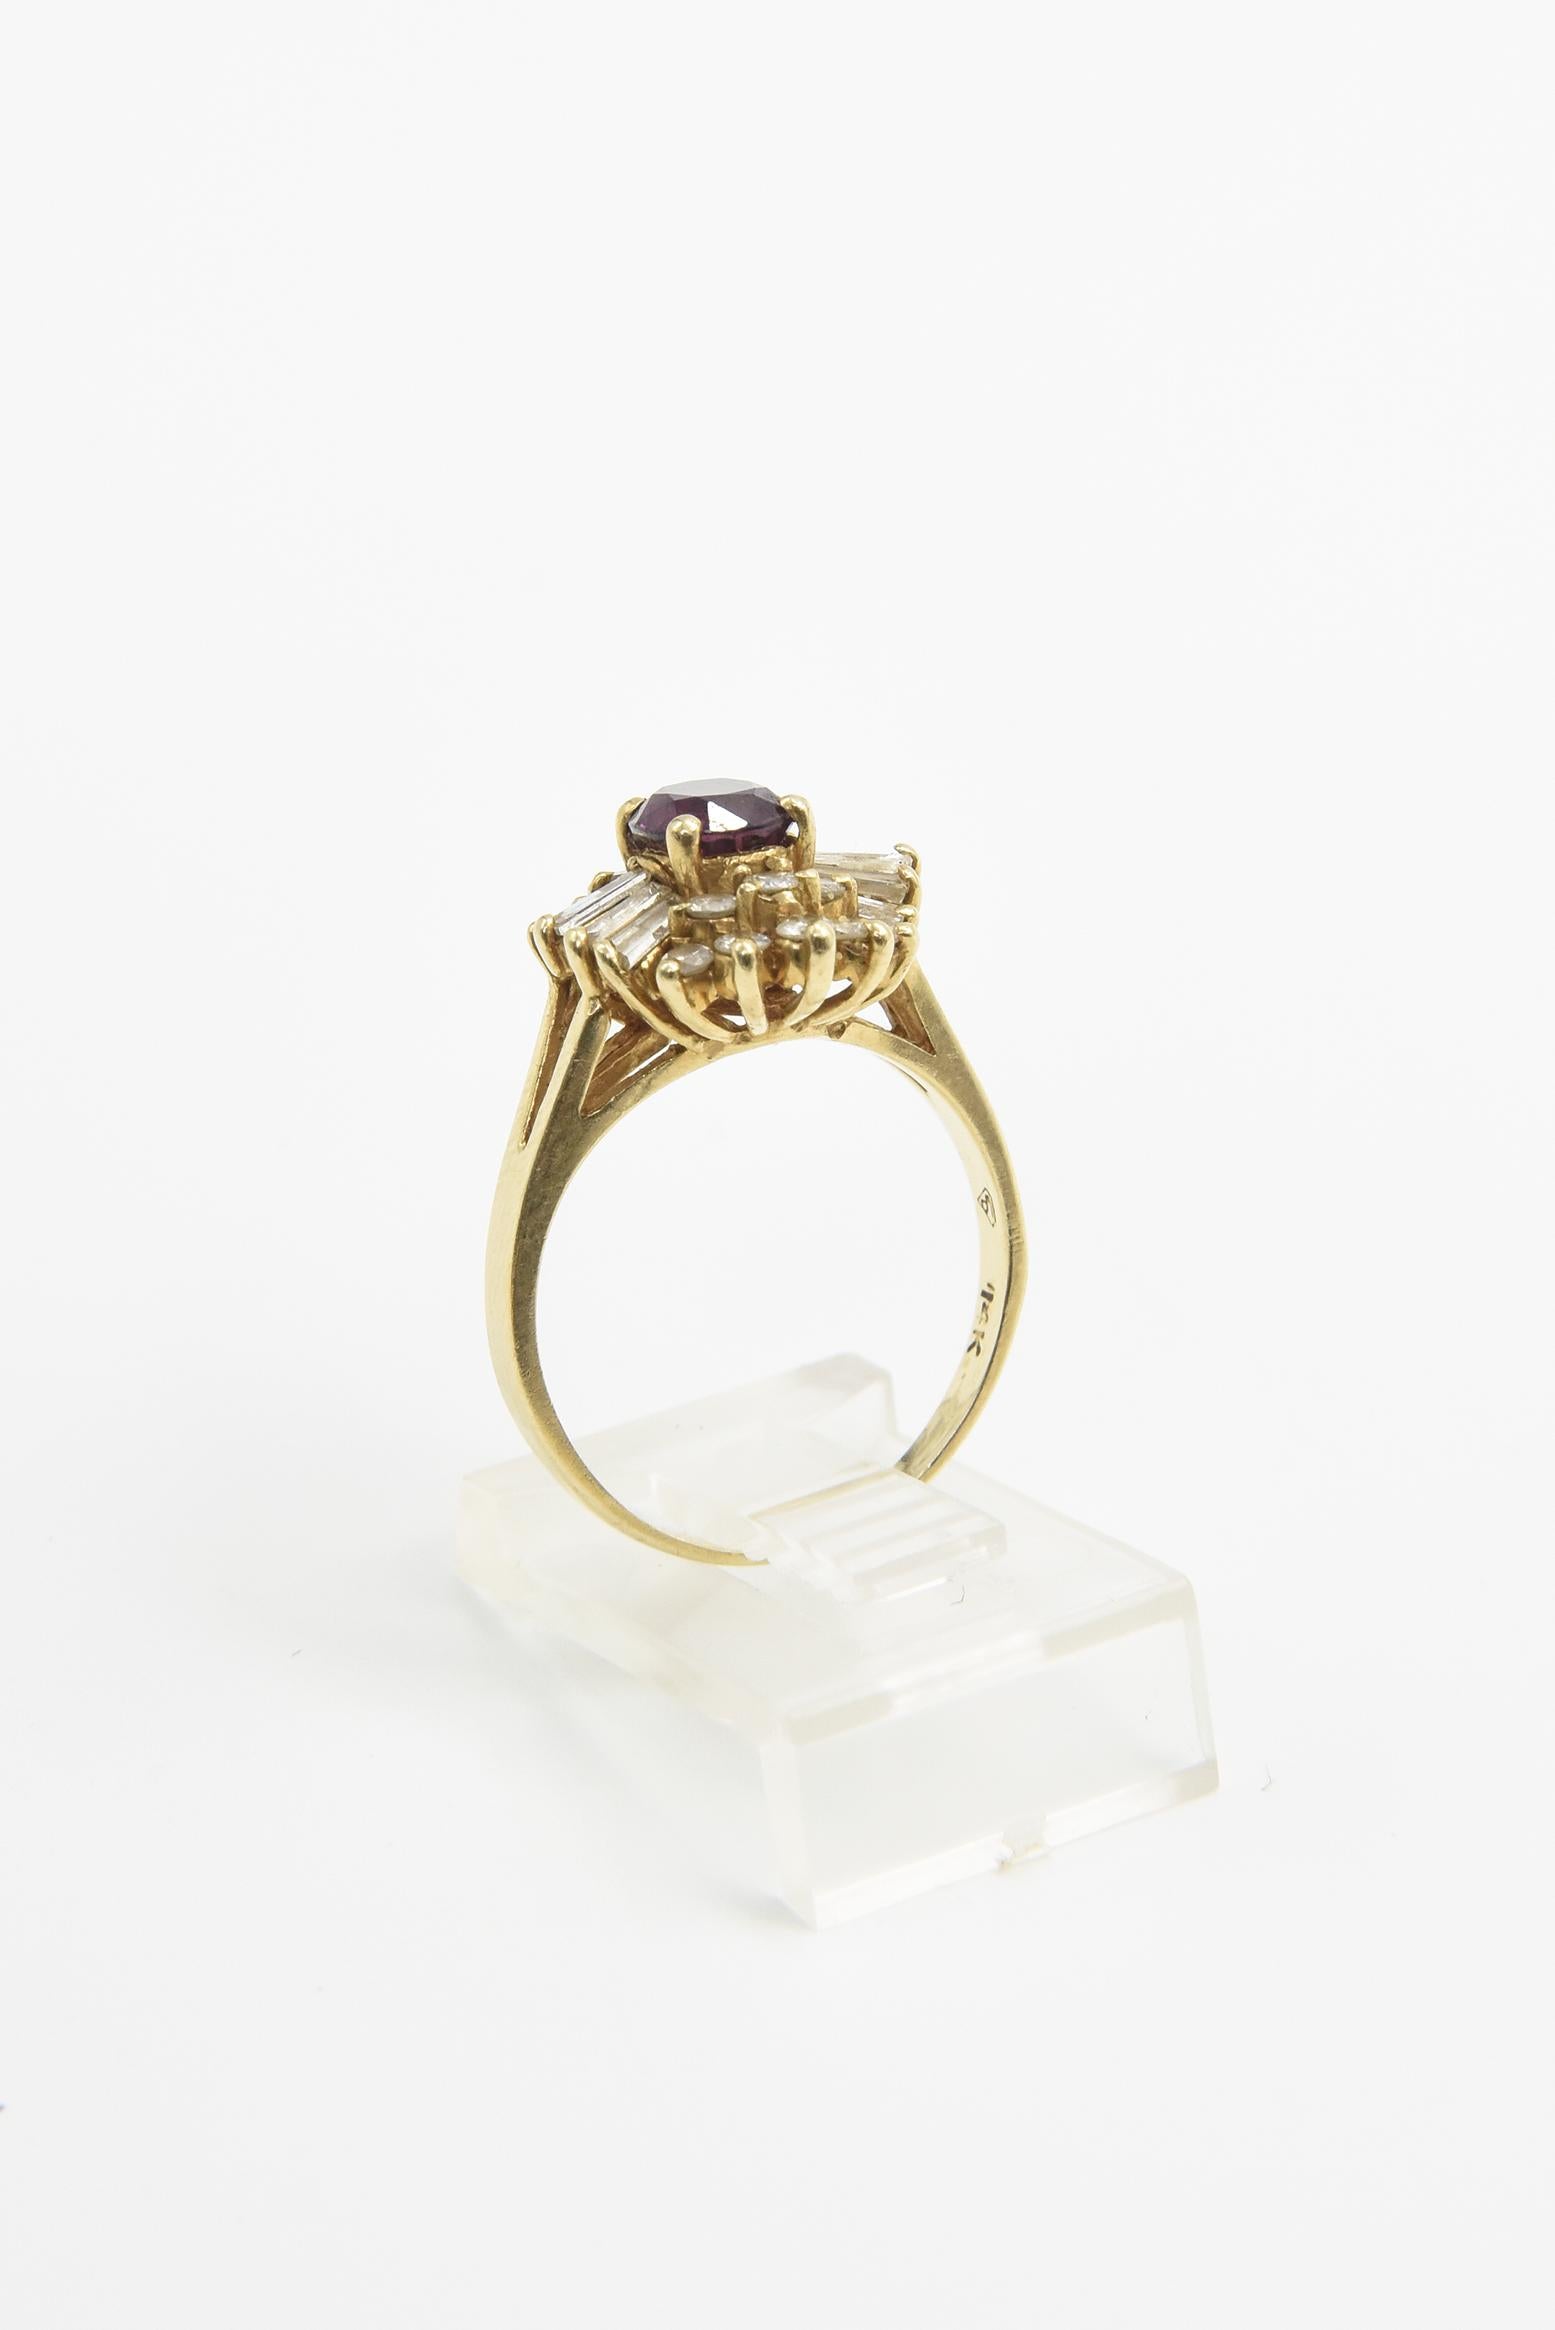 Ruby Diamond Ballerina Gold Cocktail Ring For Sale 1